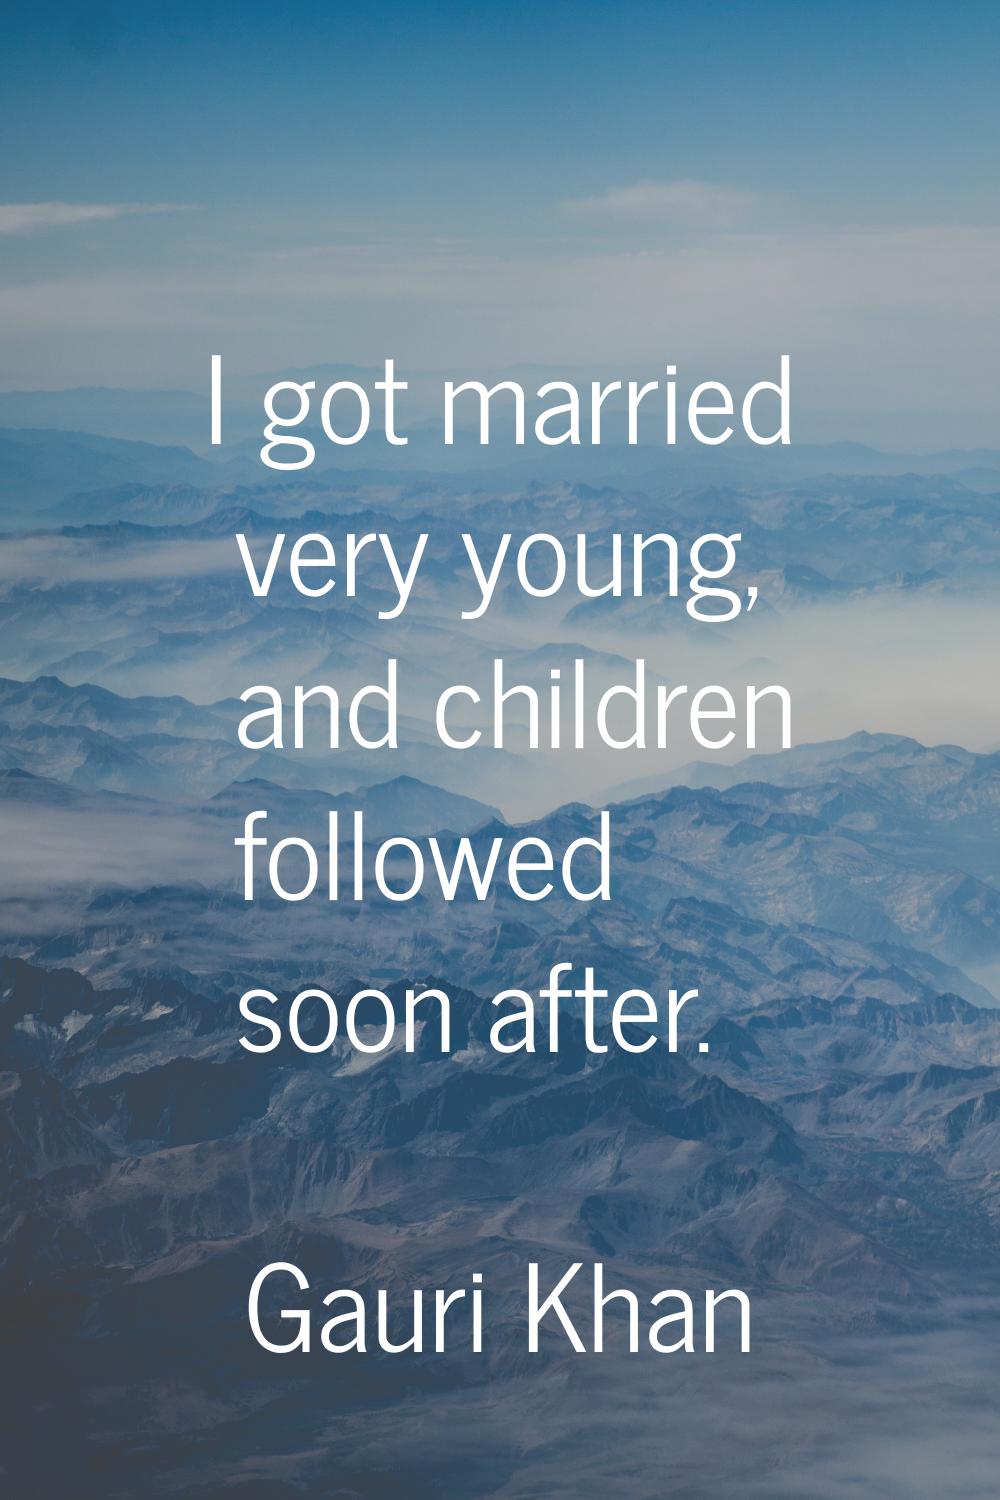 I got married very young, and children followed soon after.